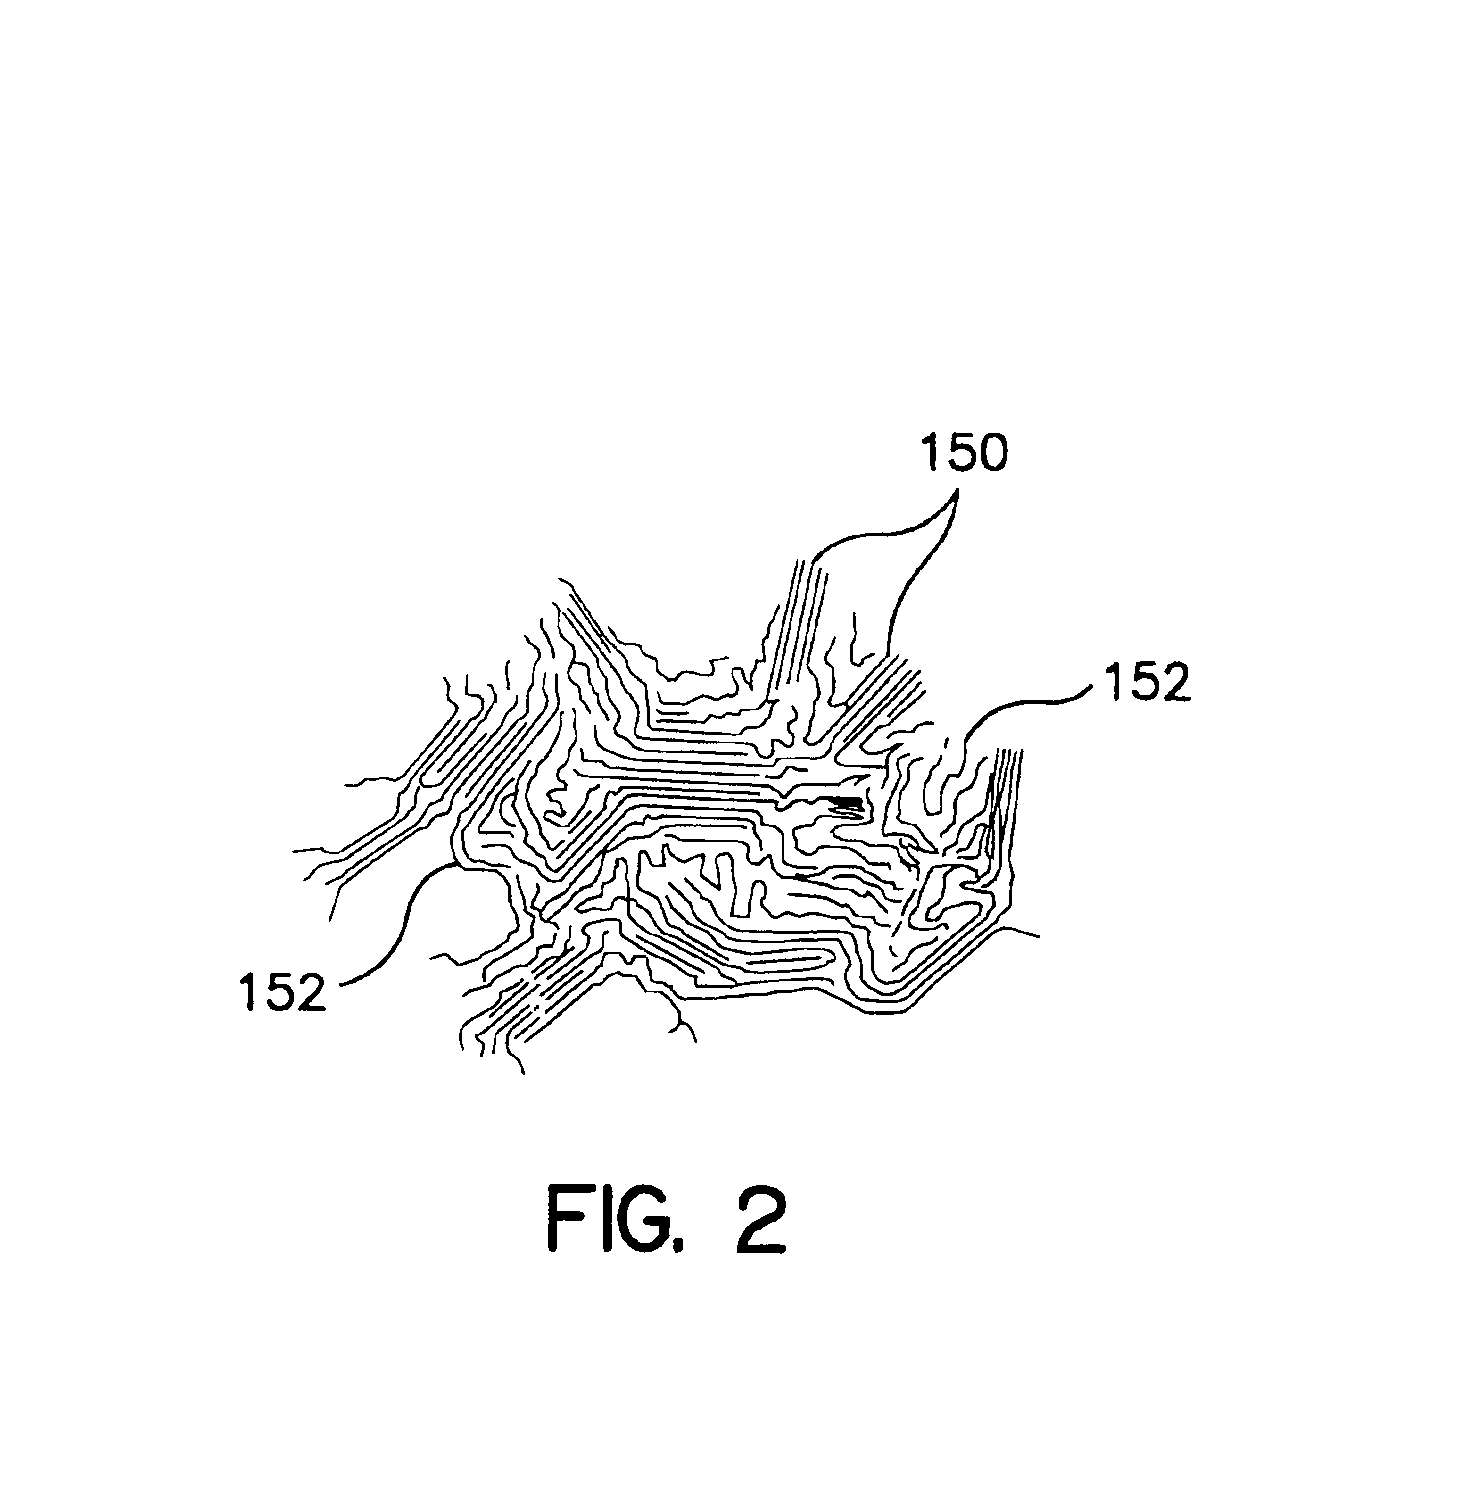 Modified rubber-based adhesives